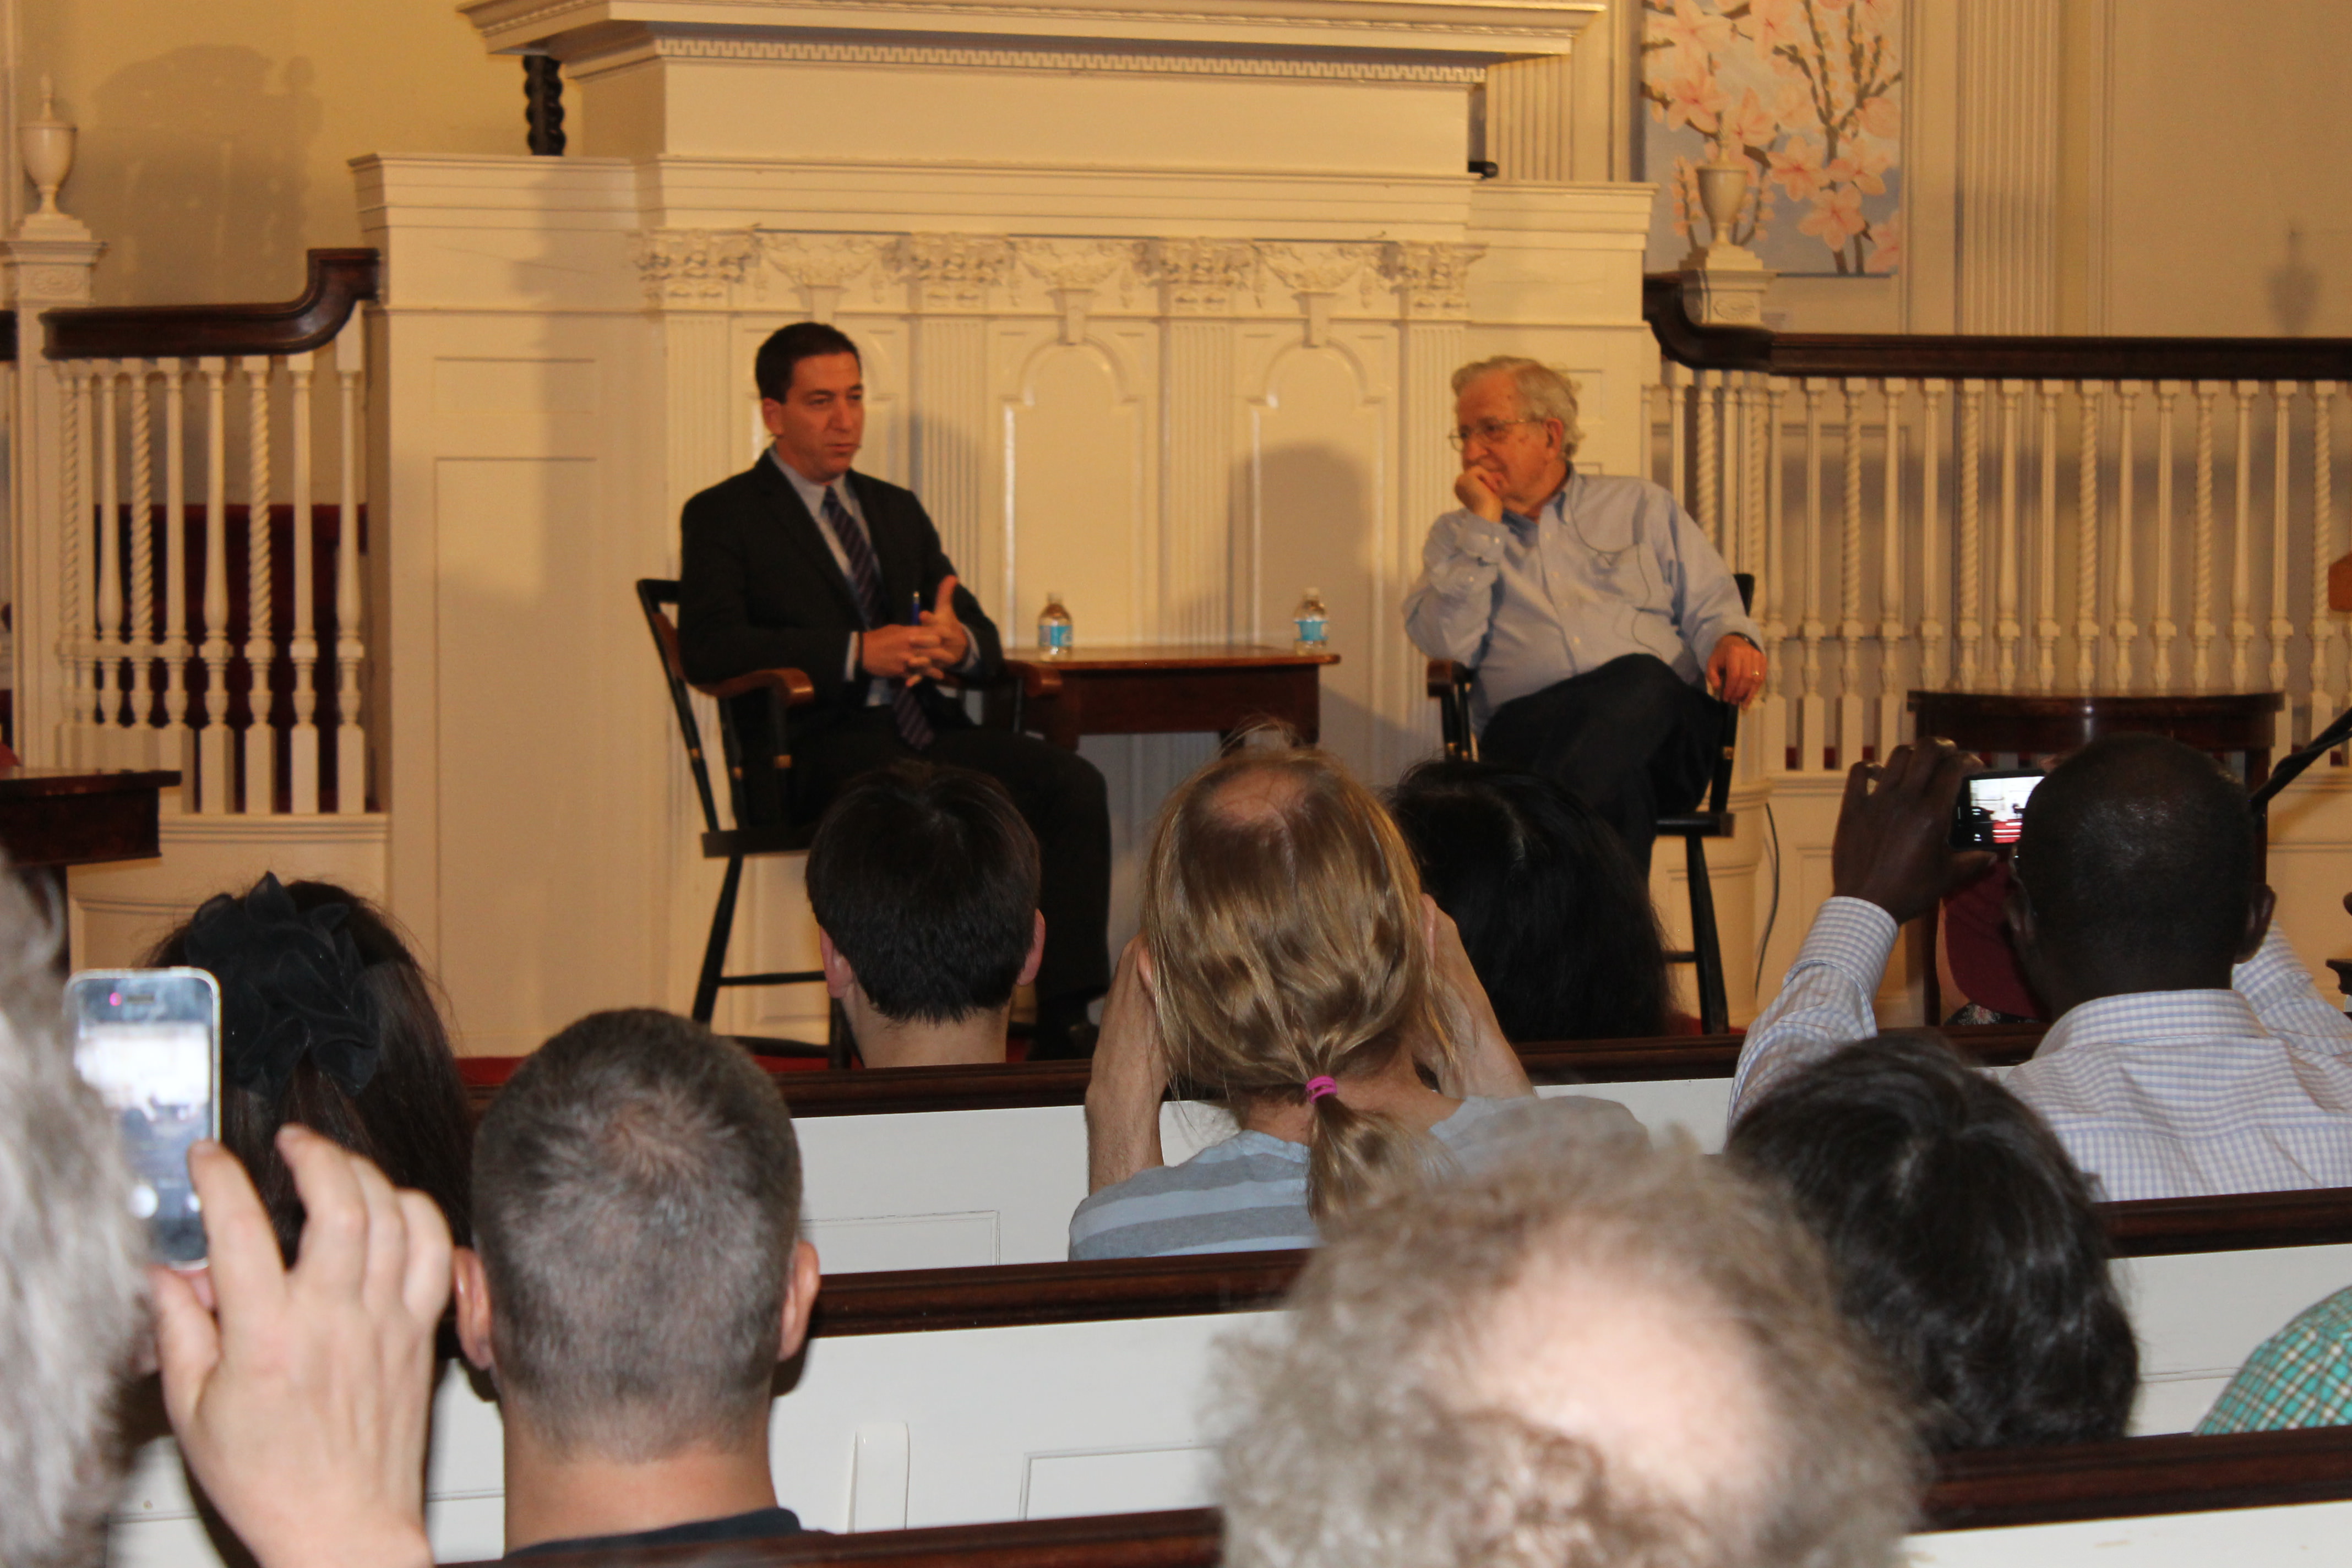 Glenn Greenwald, left, and Noam Chomsky, discuss Greenwald's new book about Edward Snowden and NSA surveillance.